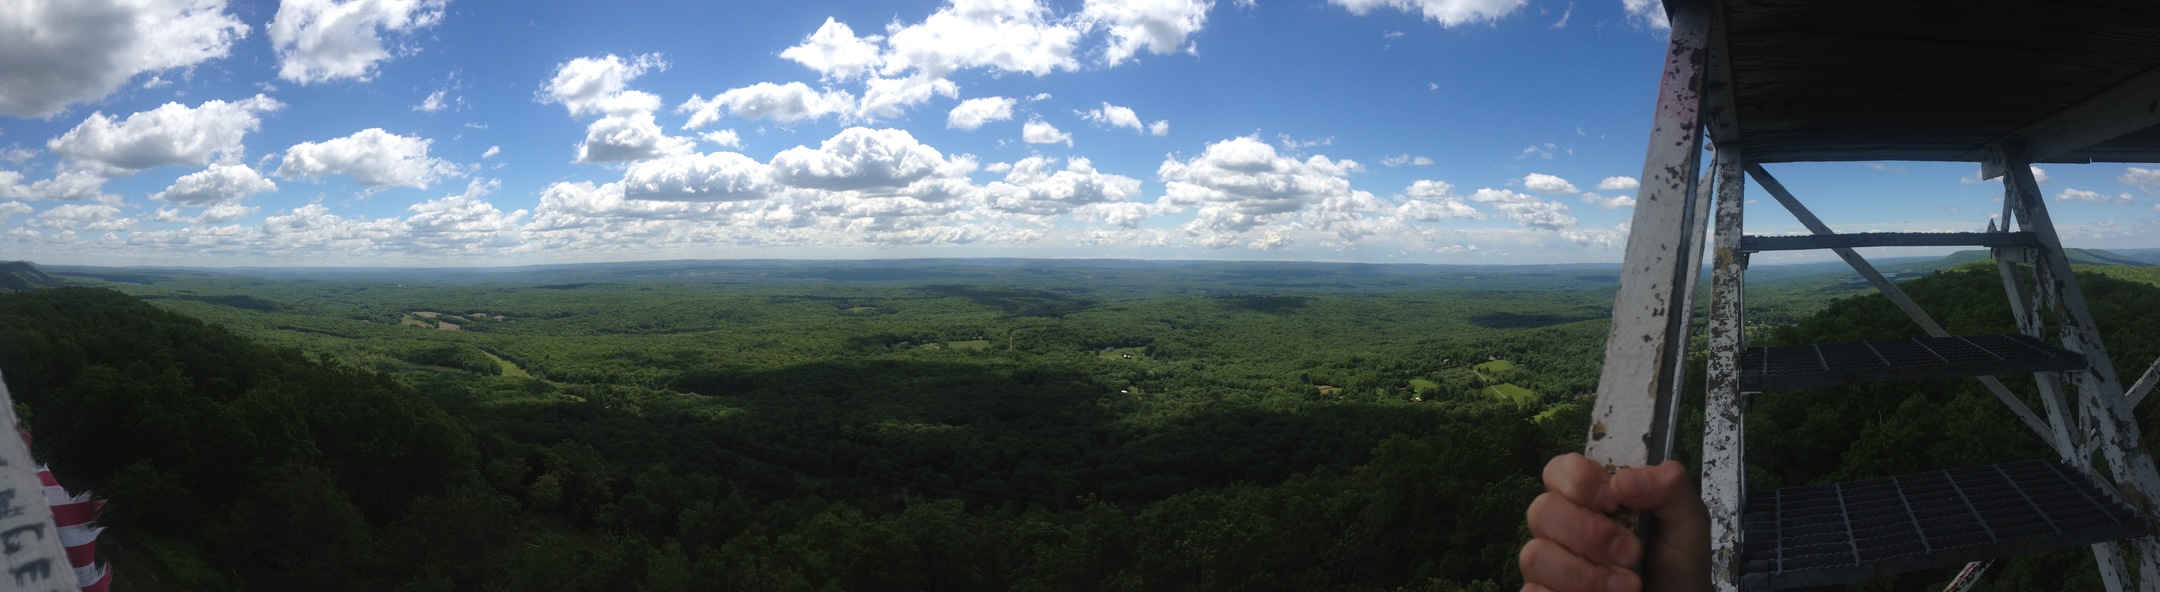 Catfish Fire Tower view